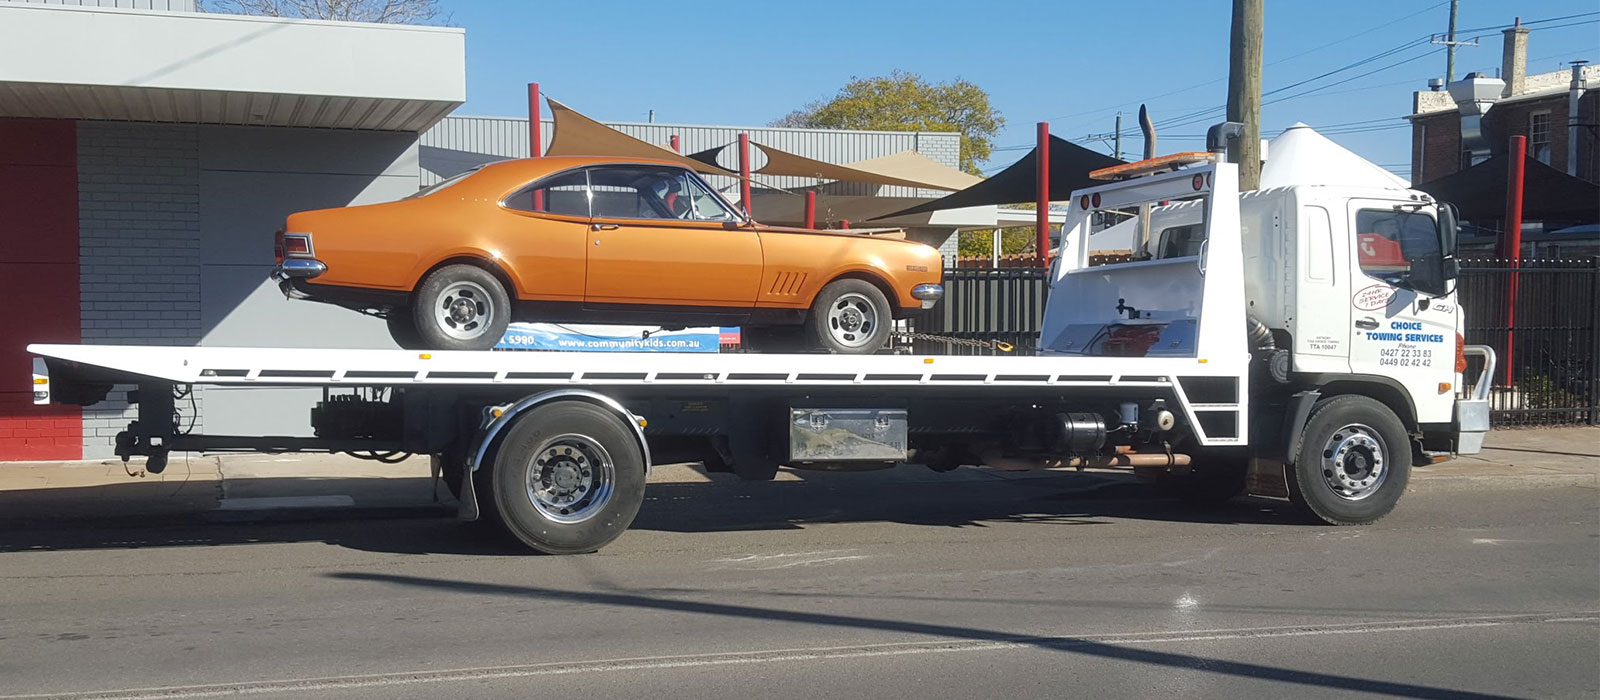 Reliable Towing Services in NSW